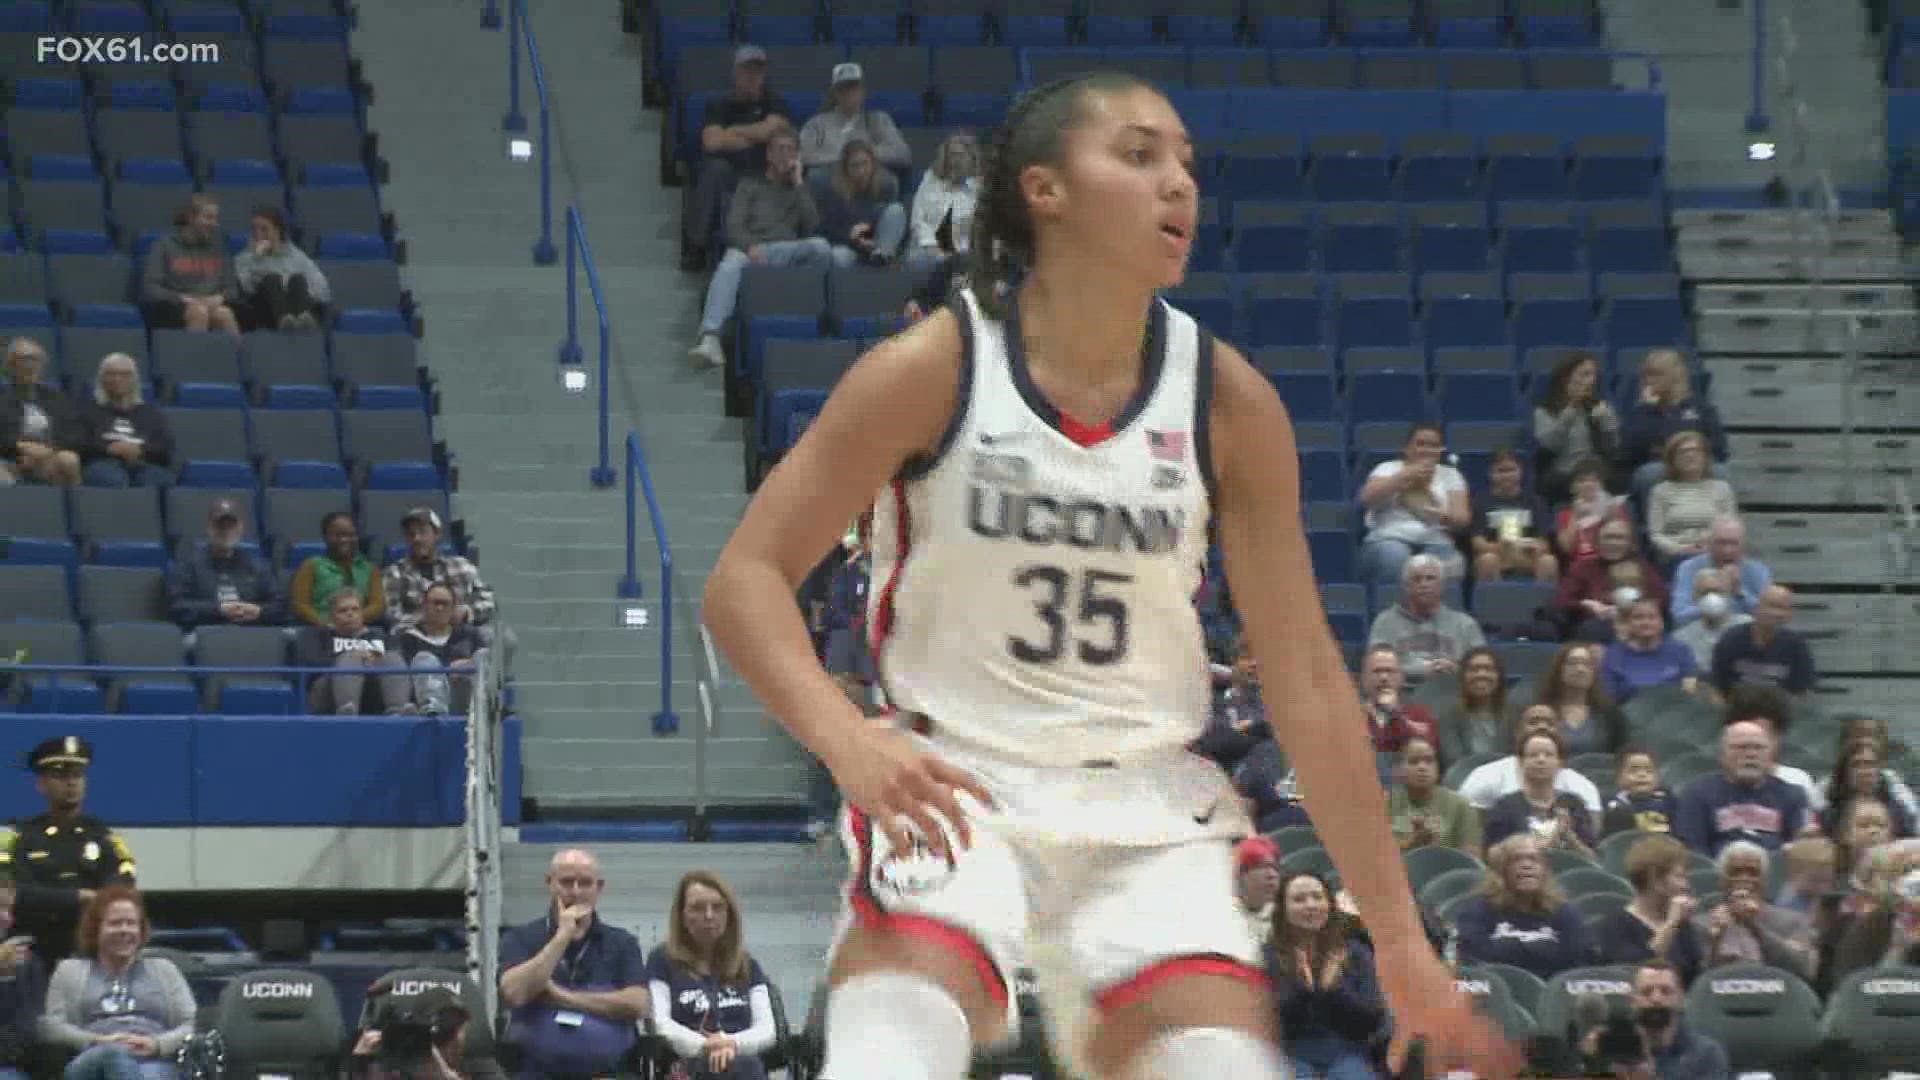 UConn has many new faces on this year's roster and many injuries, so expectations have been limited.